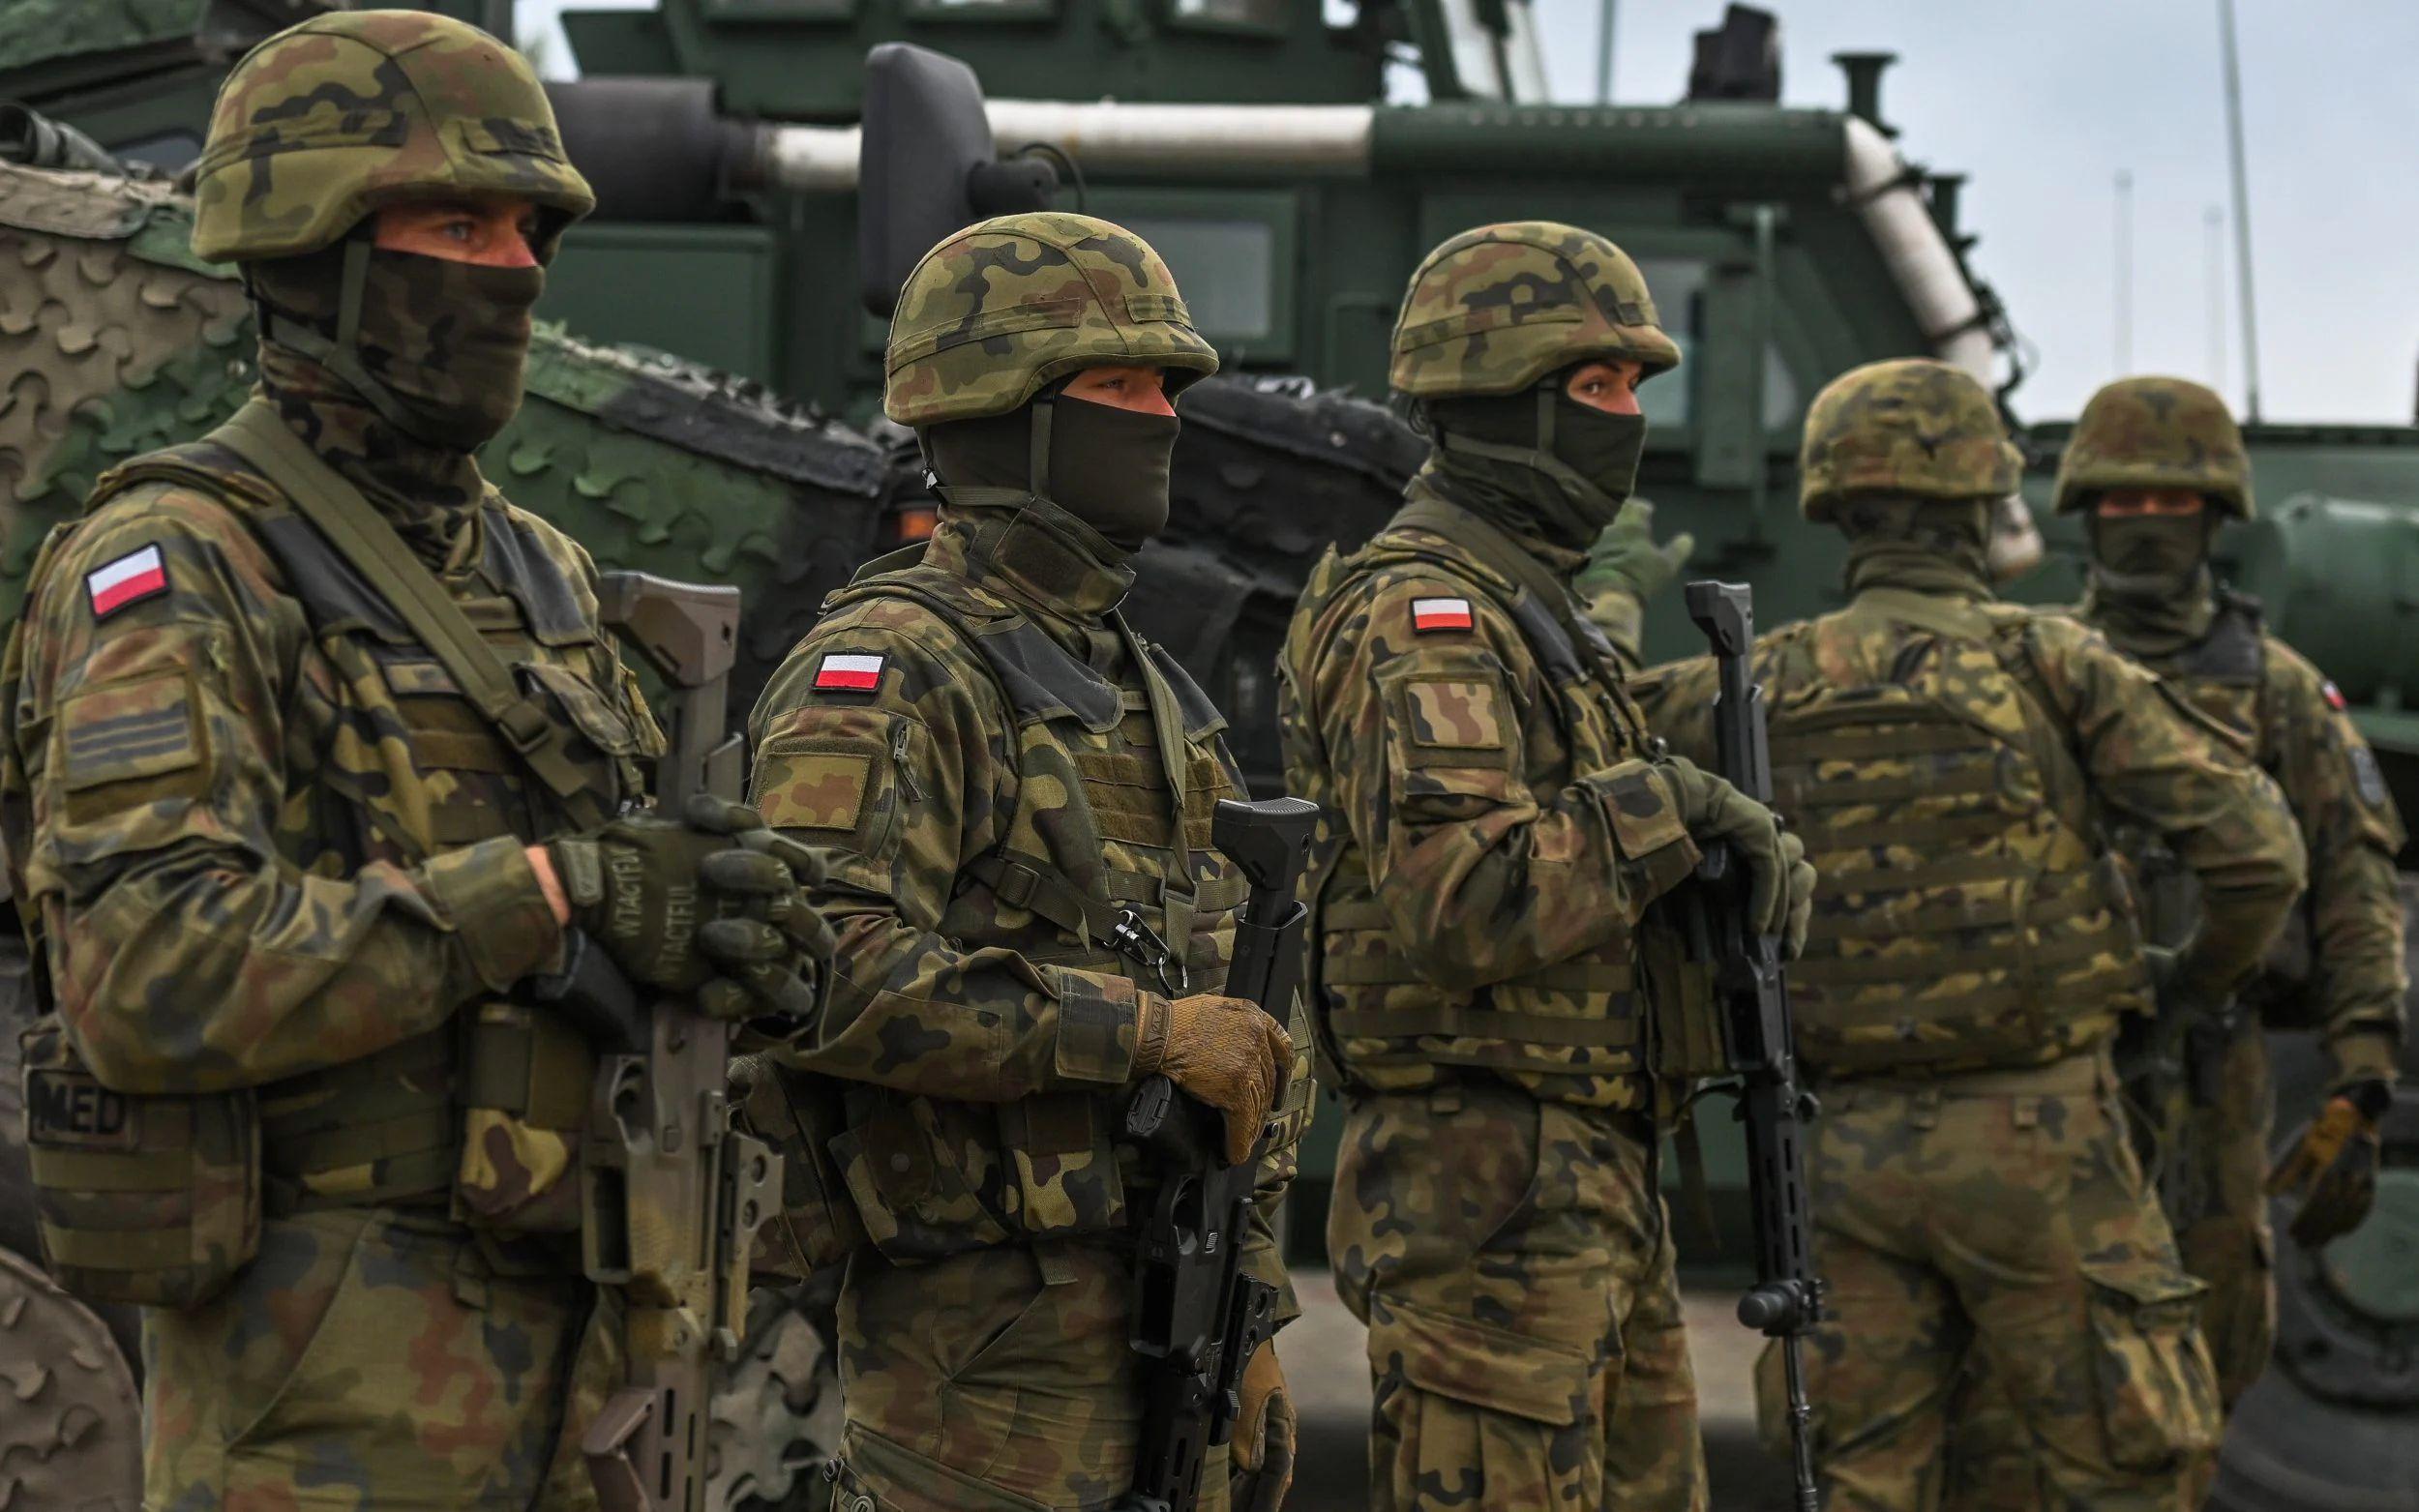 Polish Armed Forces